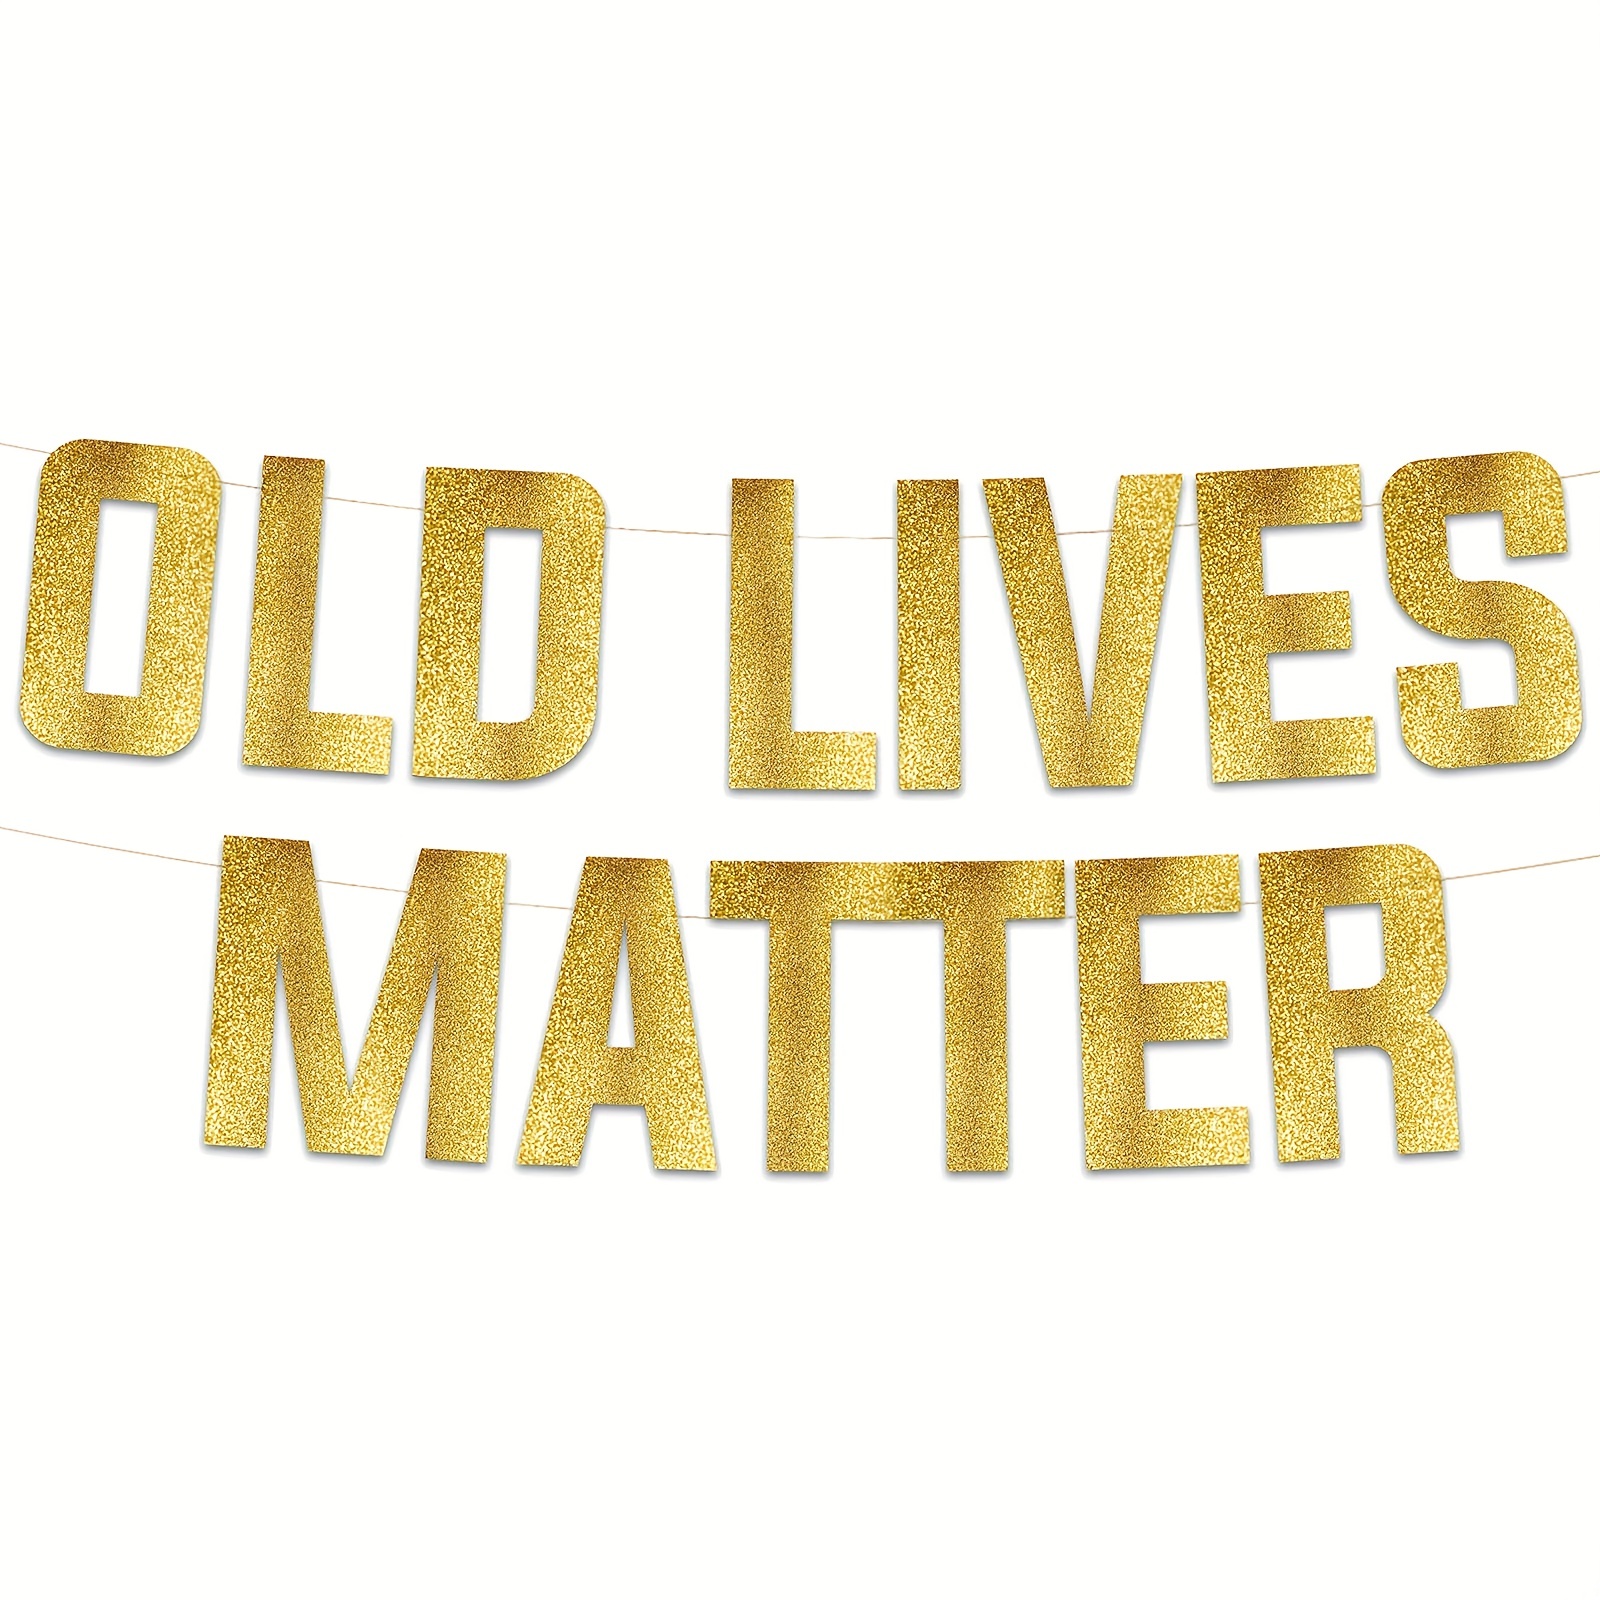 

Old Lives Matter - Birthday Golden Glitter Banner - Birthday And Retirement Party Supplies, Gifts And Decorations, Party Decor, Sign Bunting Party Decor Photo Booth Props, Pop Words Banner Easter Gift